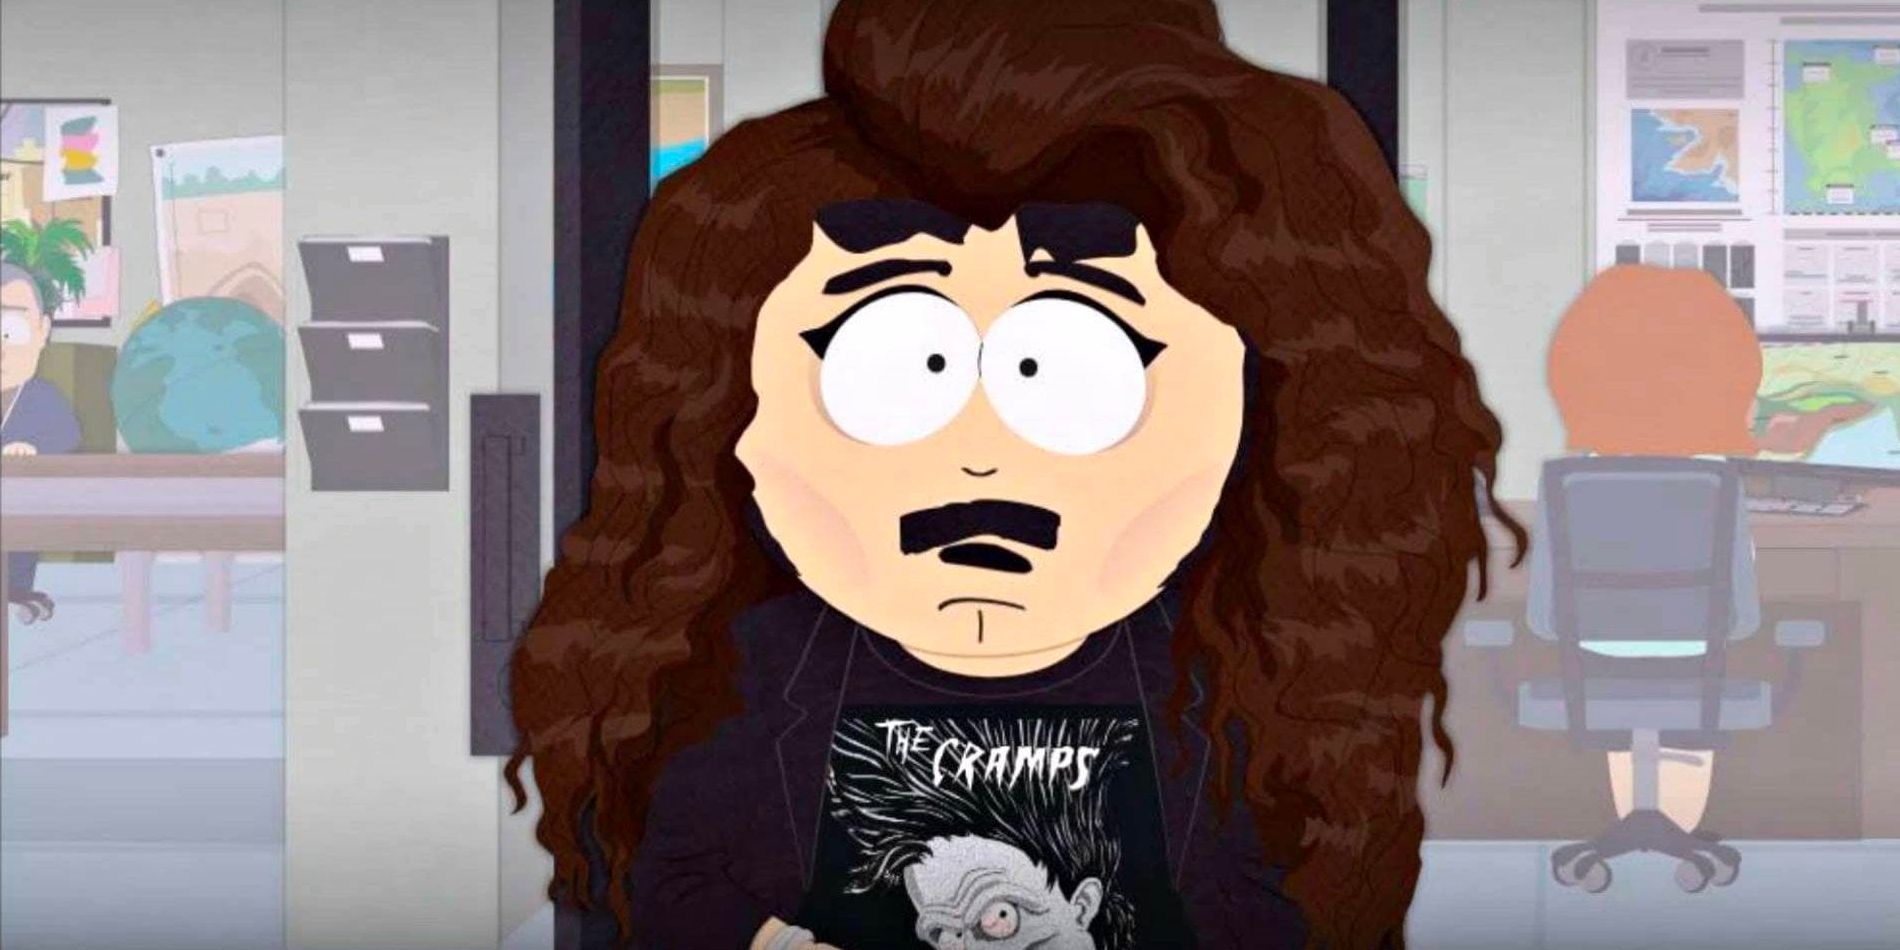 Lorde, who is actually Randy Marsh in disguise, works in the office.